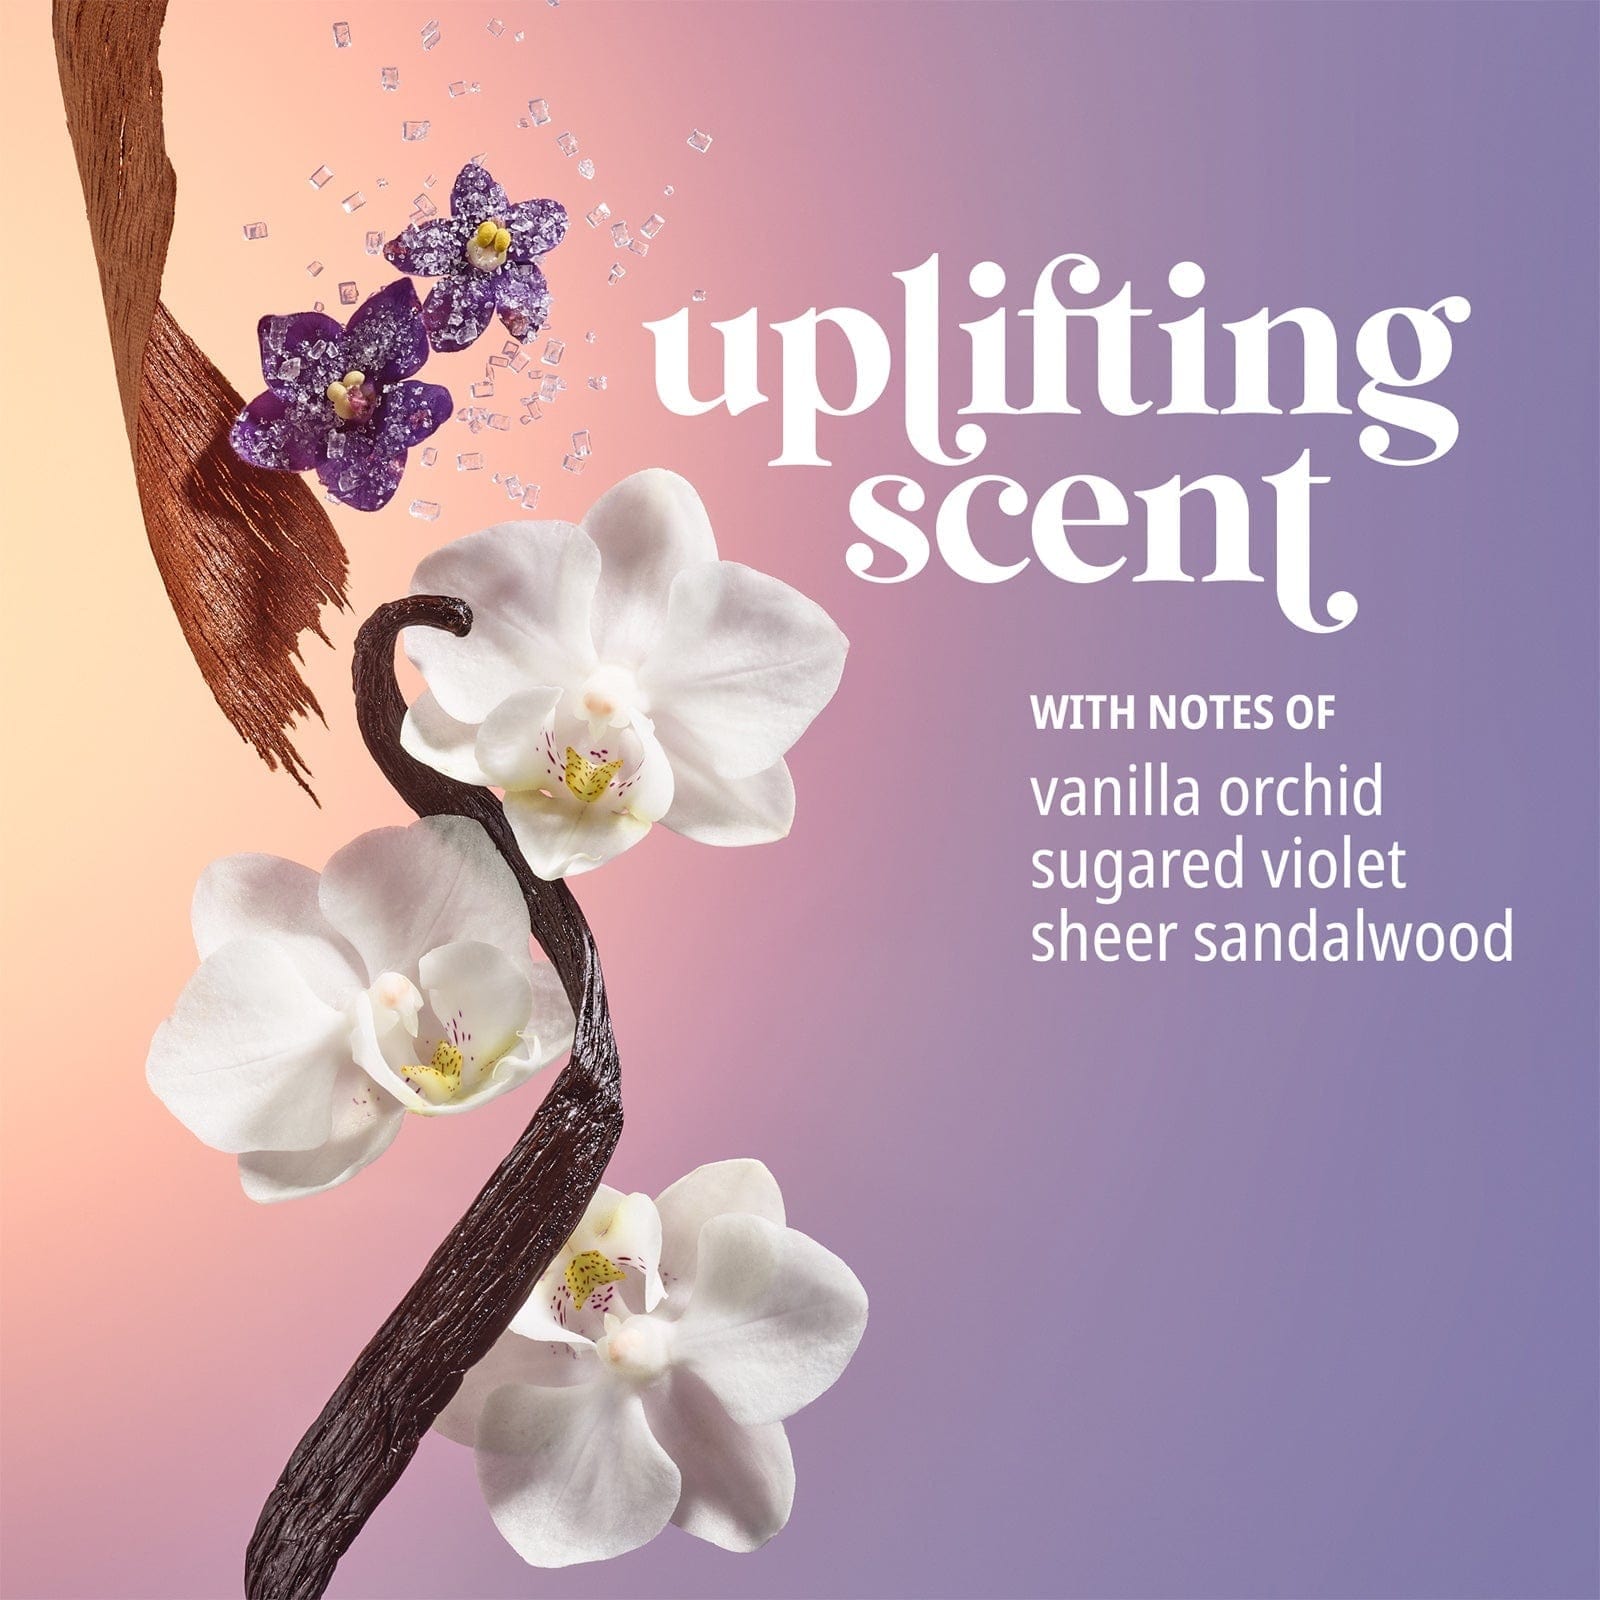 Uplifting scent with notes of vanilla orchid, sugared violet, sheer sandalwood